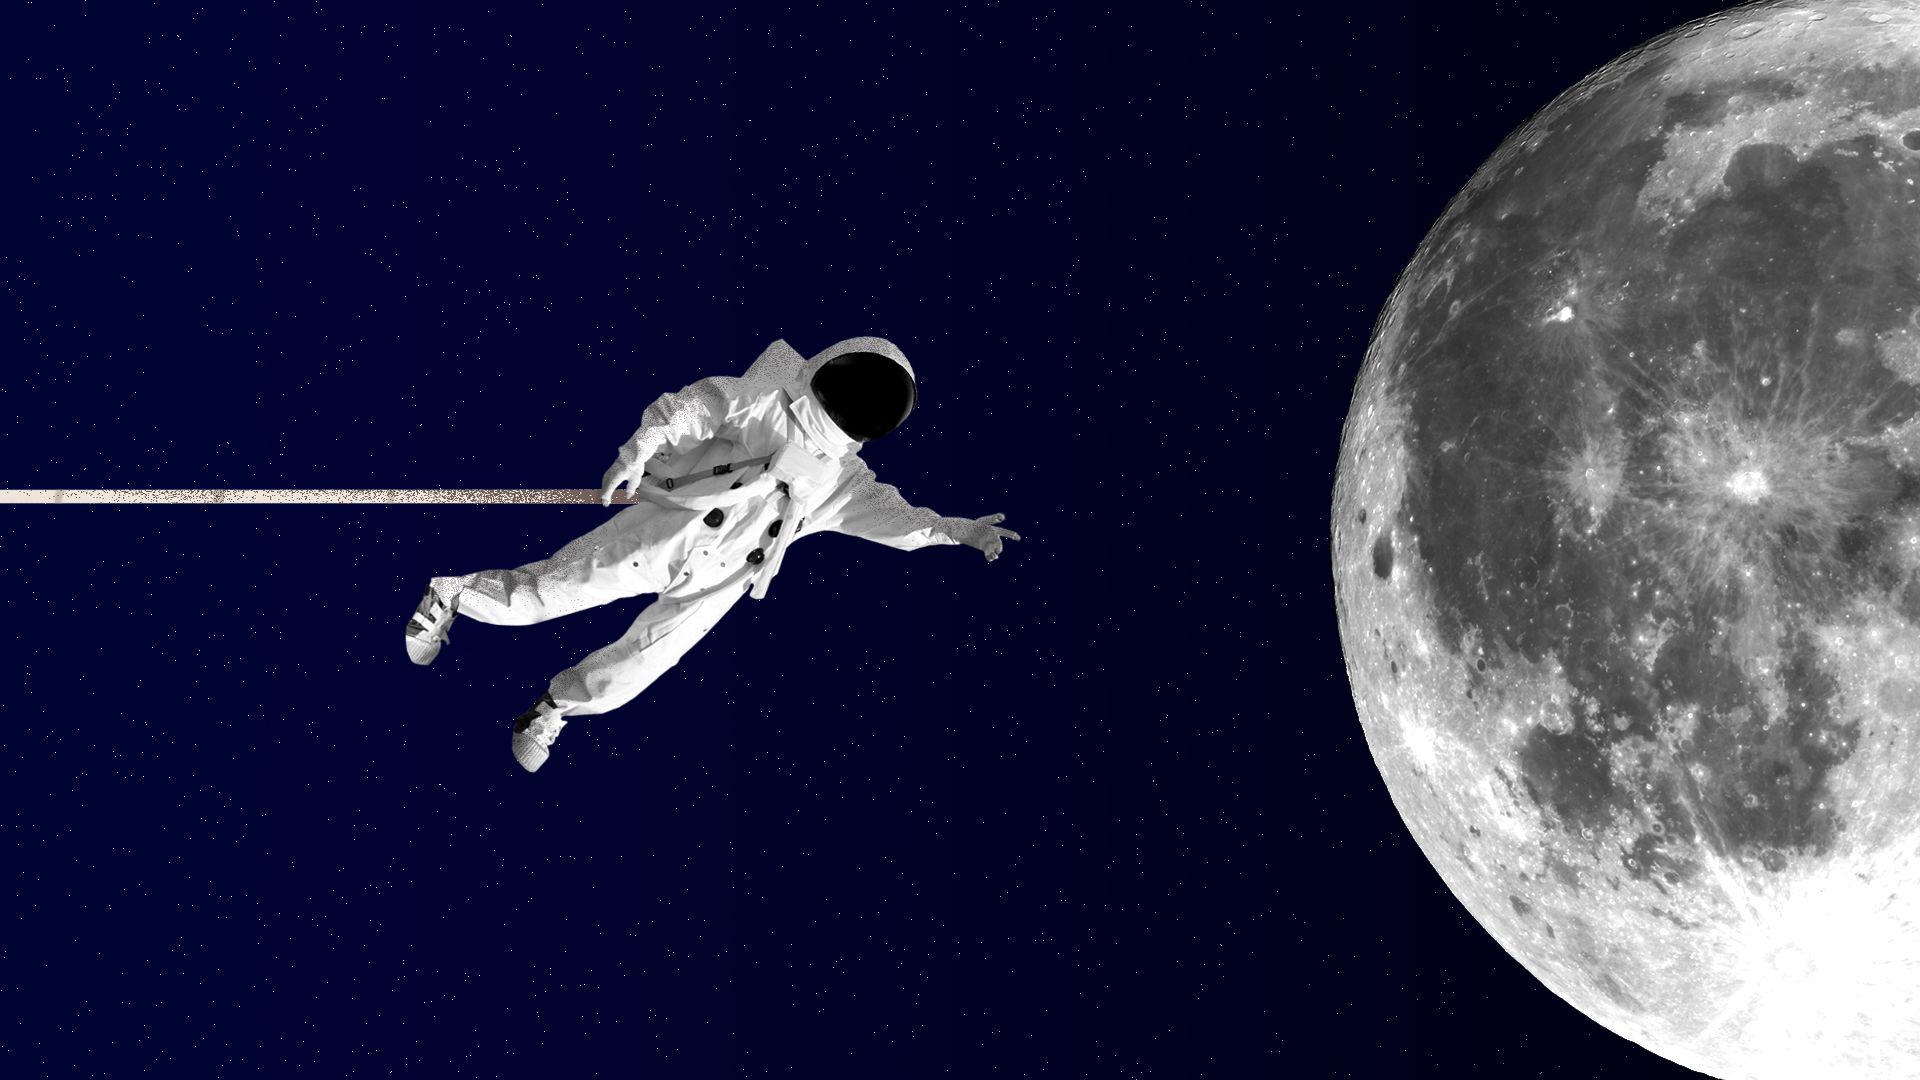 Illustration of an astronaut reaching out for the moon.